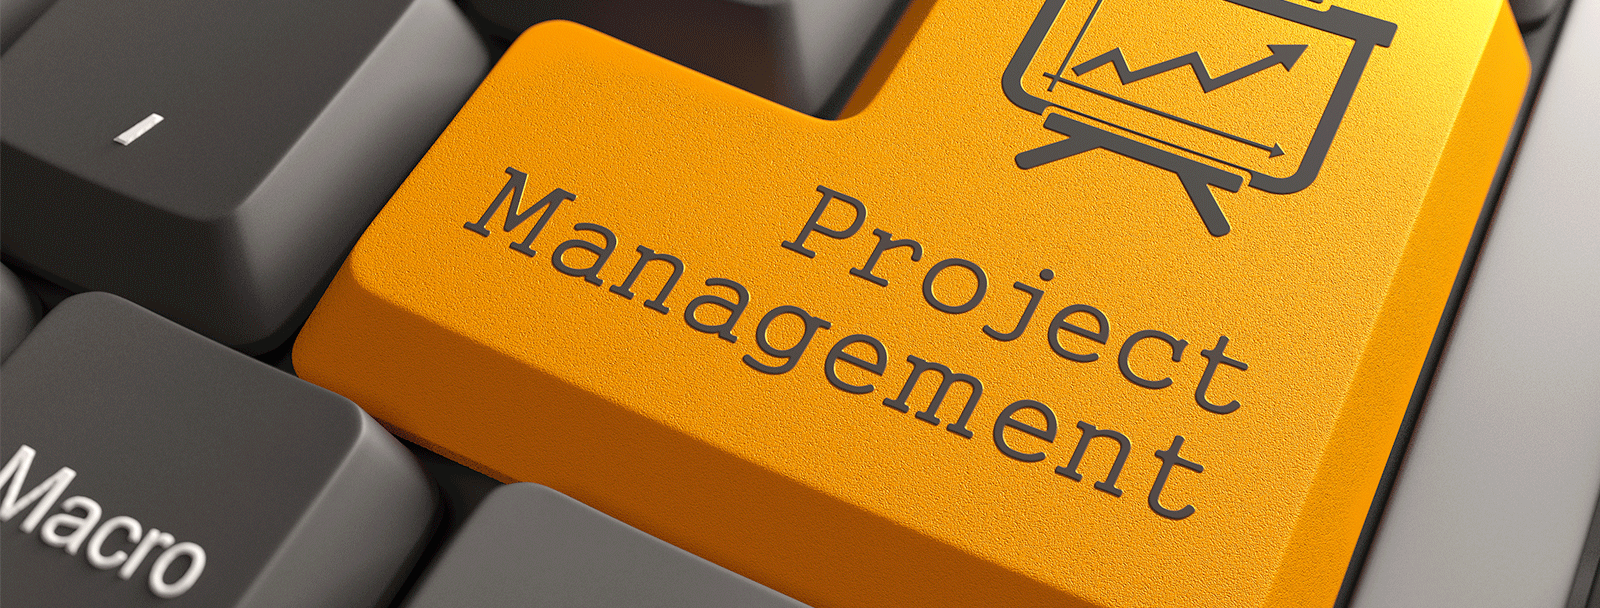 PMP Test Prep Boot Camp project management keyboard